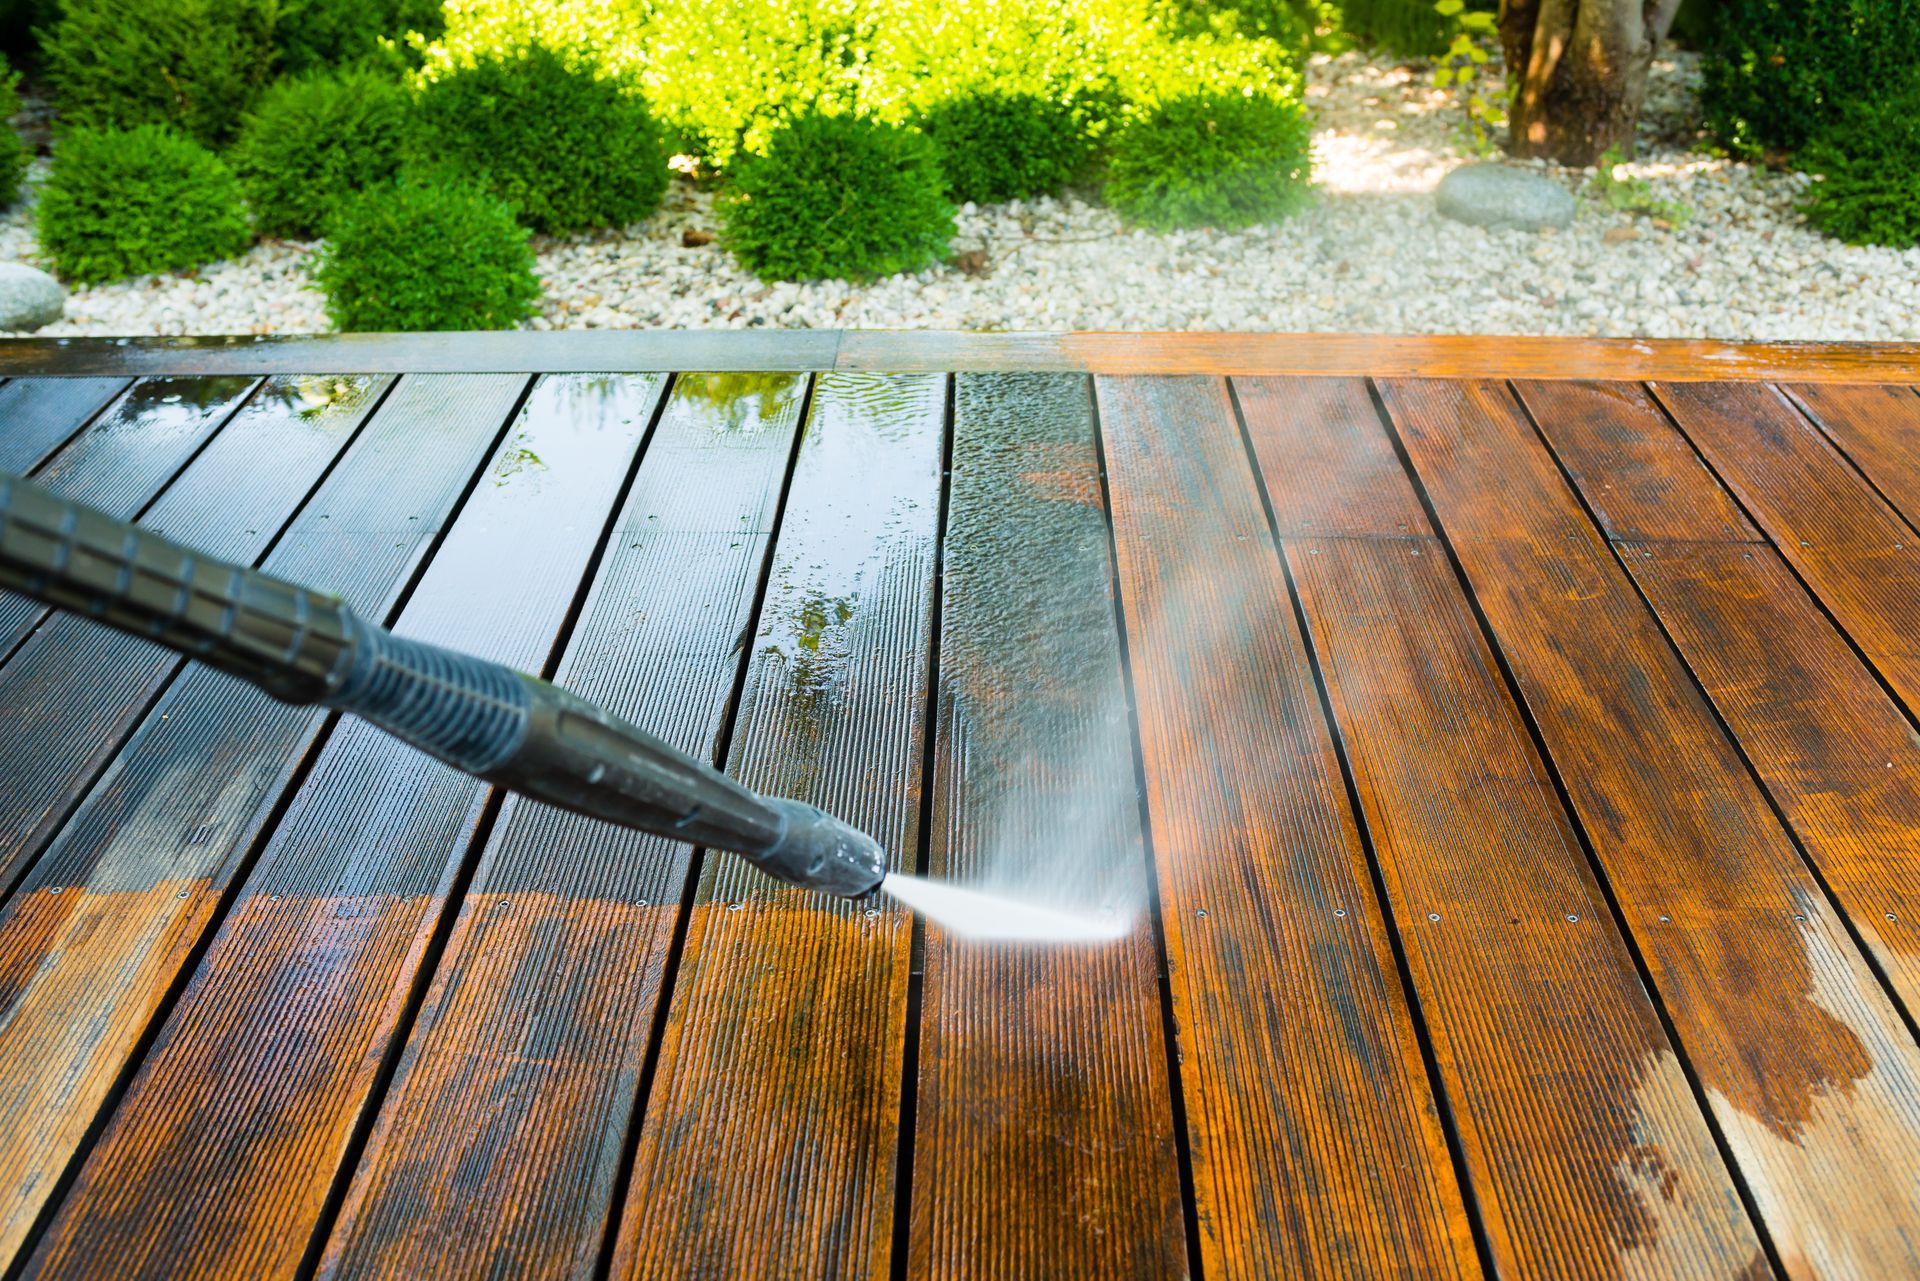 A person using a high water pressure cleaner to clean a wooden terrace.